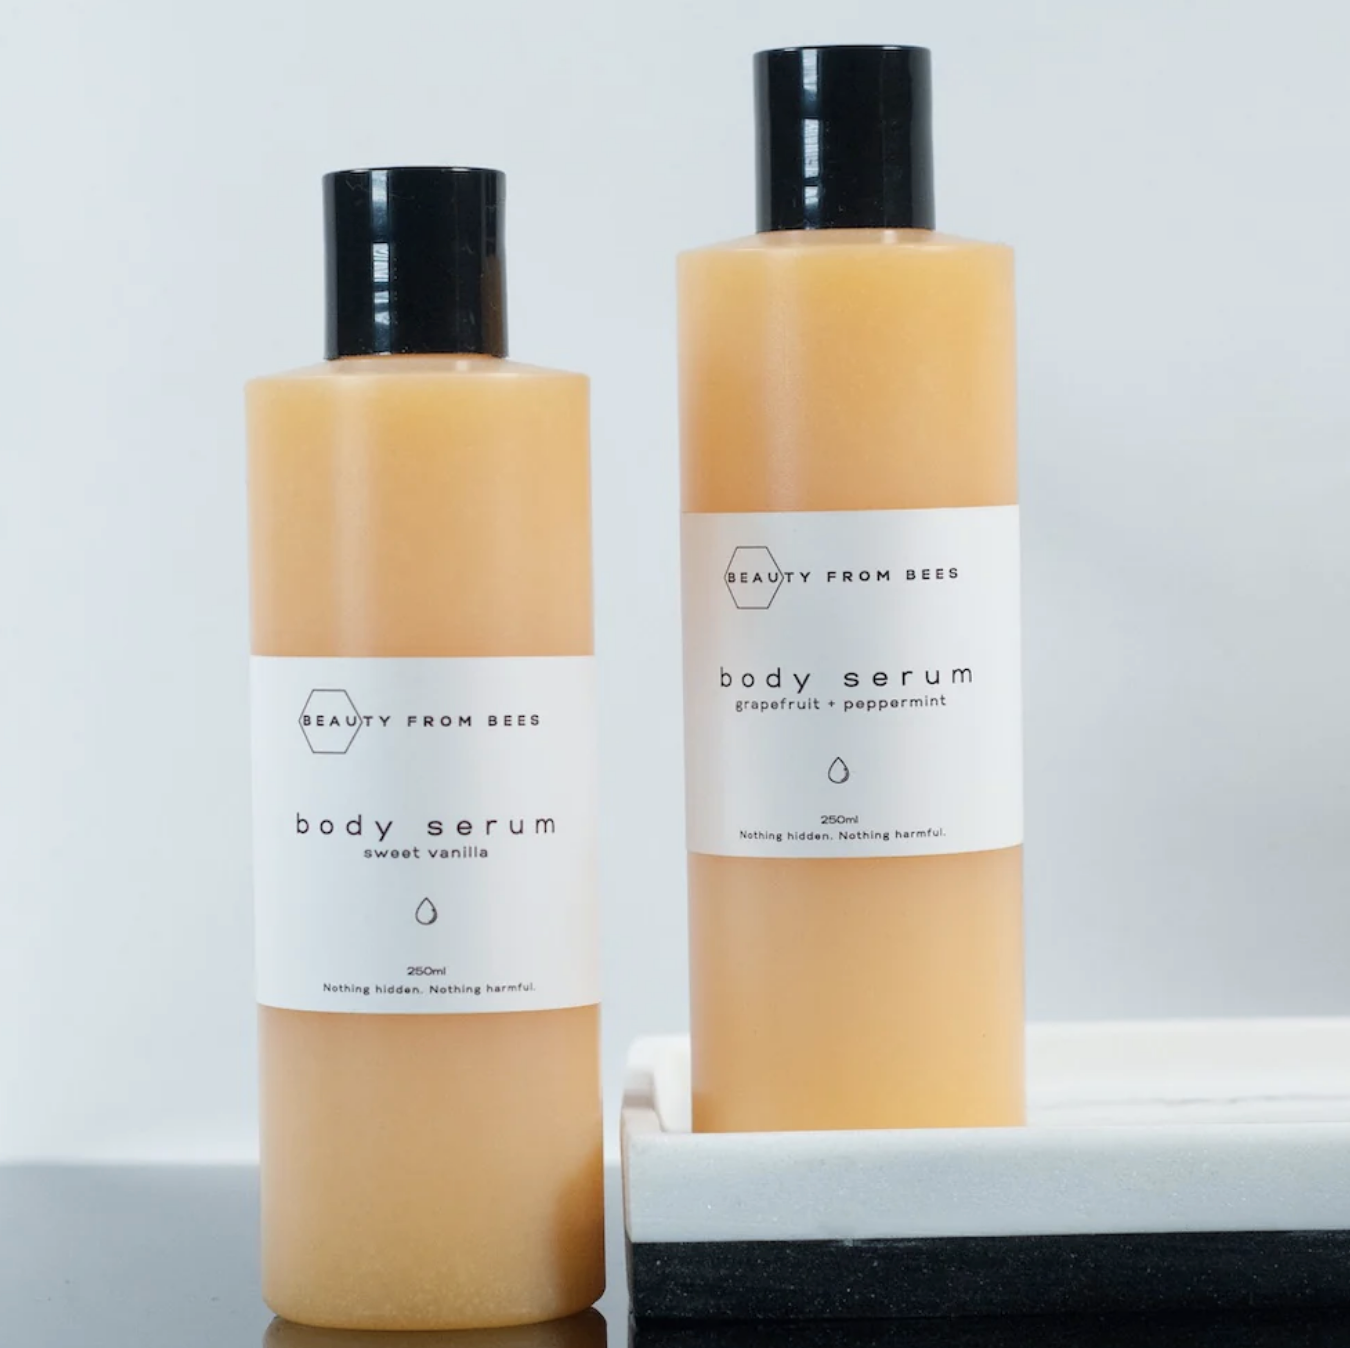 Body Serum Grapefruit & Peppermint - Beauty From Bees